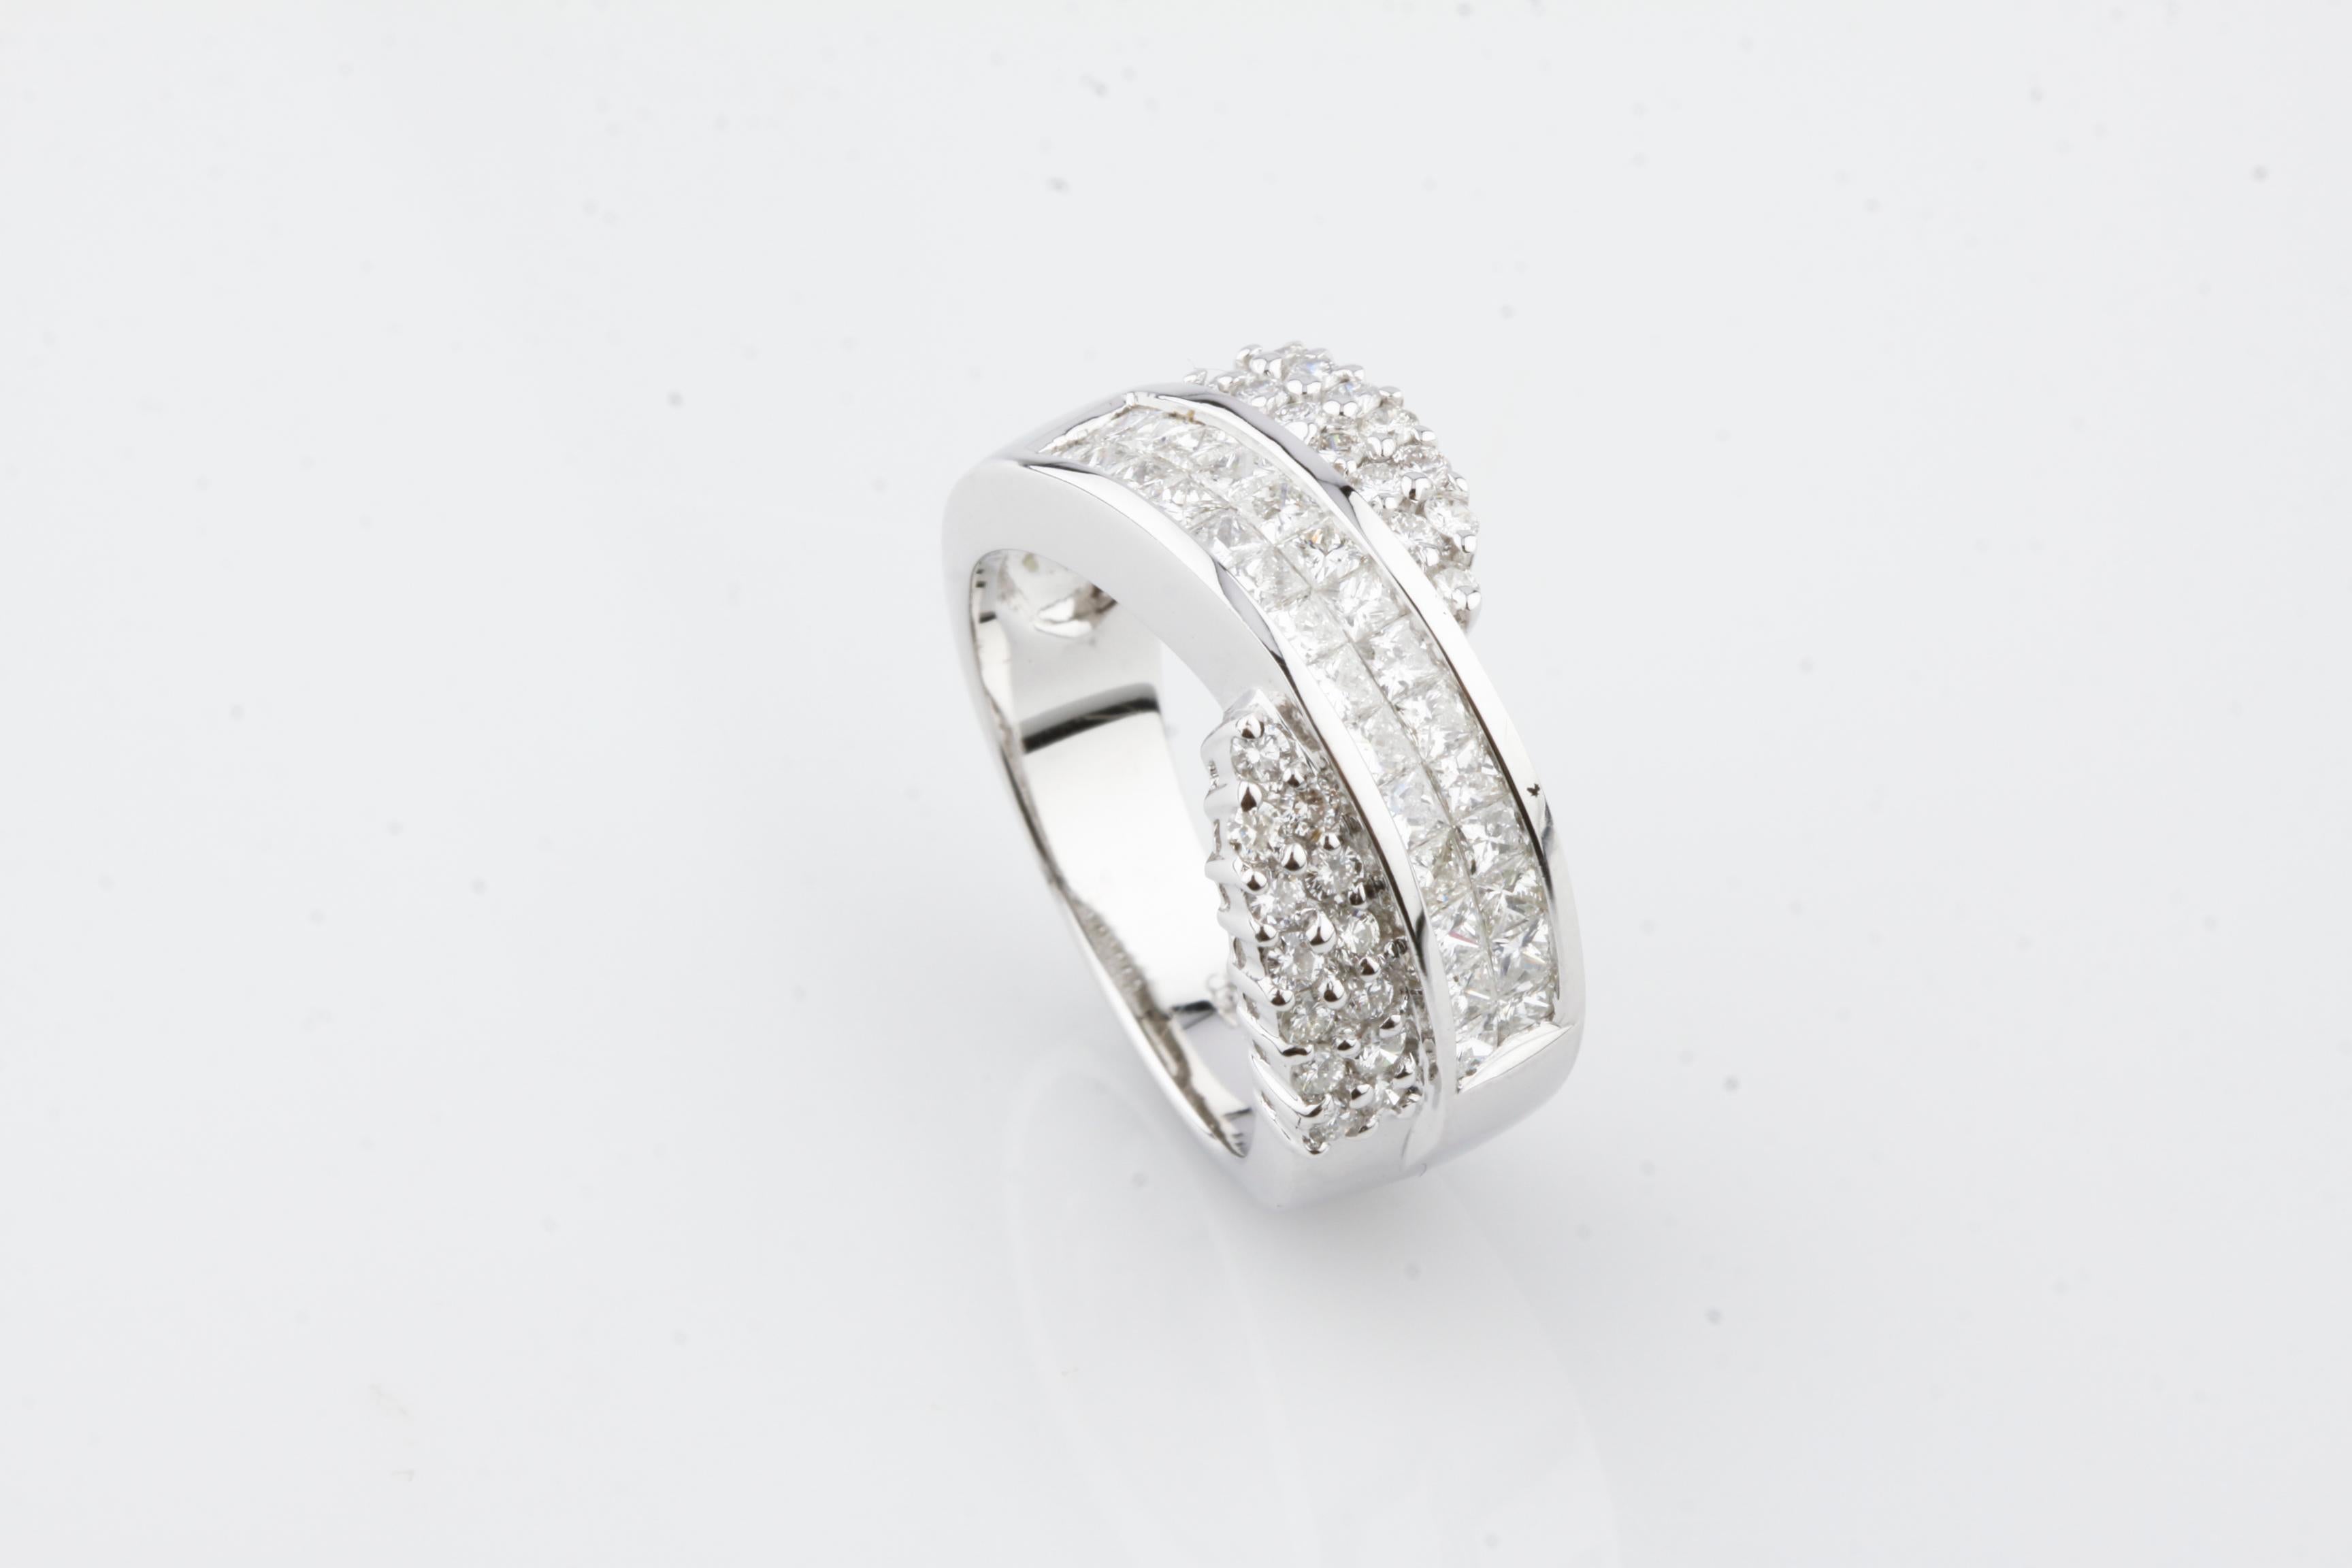 Gorgeous 18k white gold ladies diamond ring band. Lovely piece of jewelry! 

Containing:
26 Prong Set Round Brilliant Shaped Cut Diamonds 
The Below Listed Clarity & Color Grade Reflects An Overall Average Of The Group
Clarity Approximately=